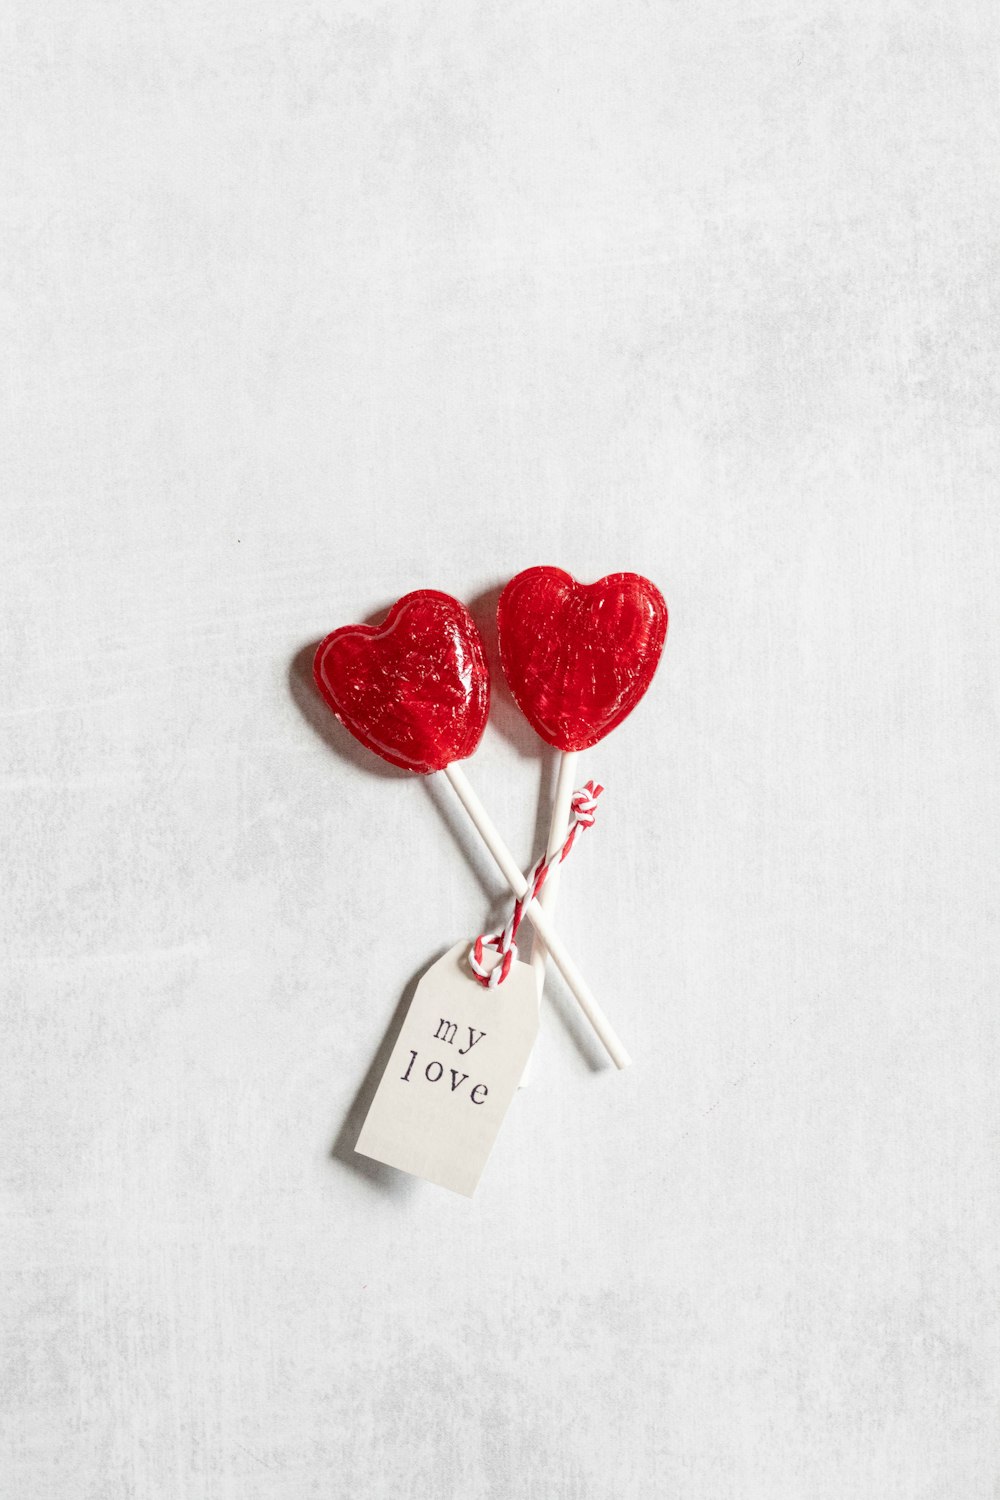 two heart shaped lollipops on a stick with a price tag